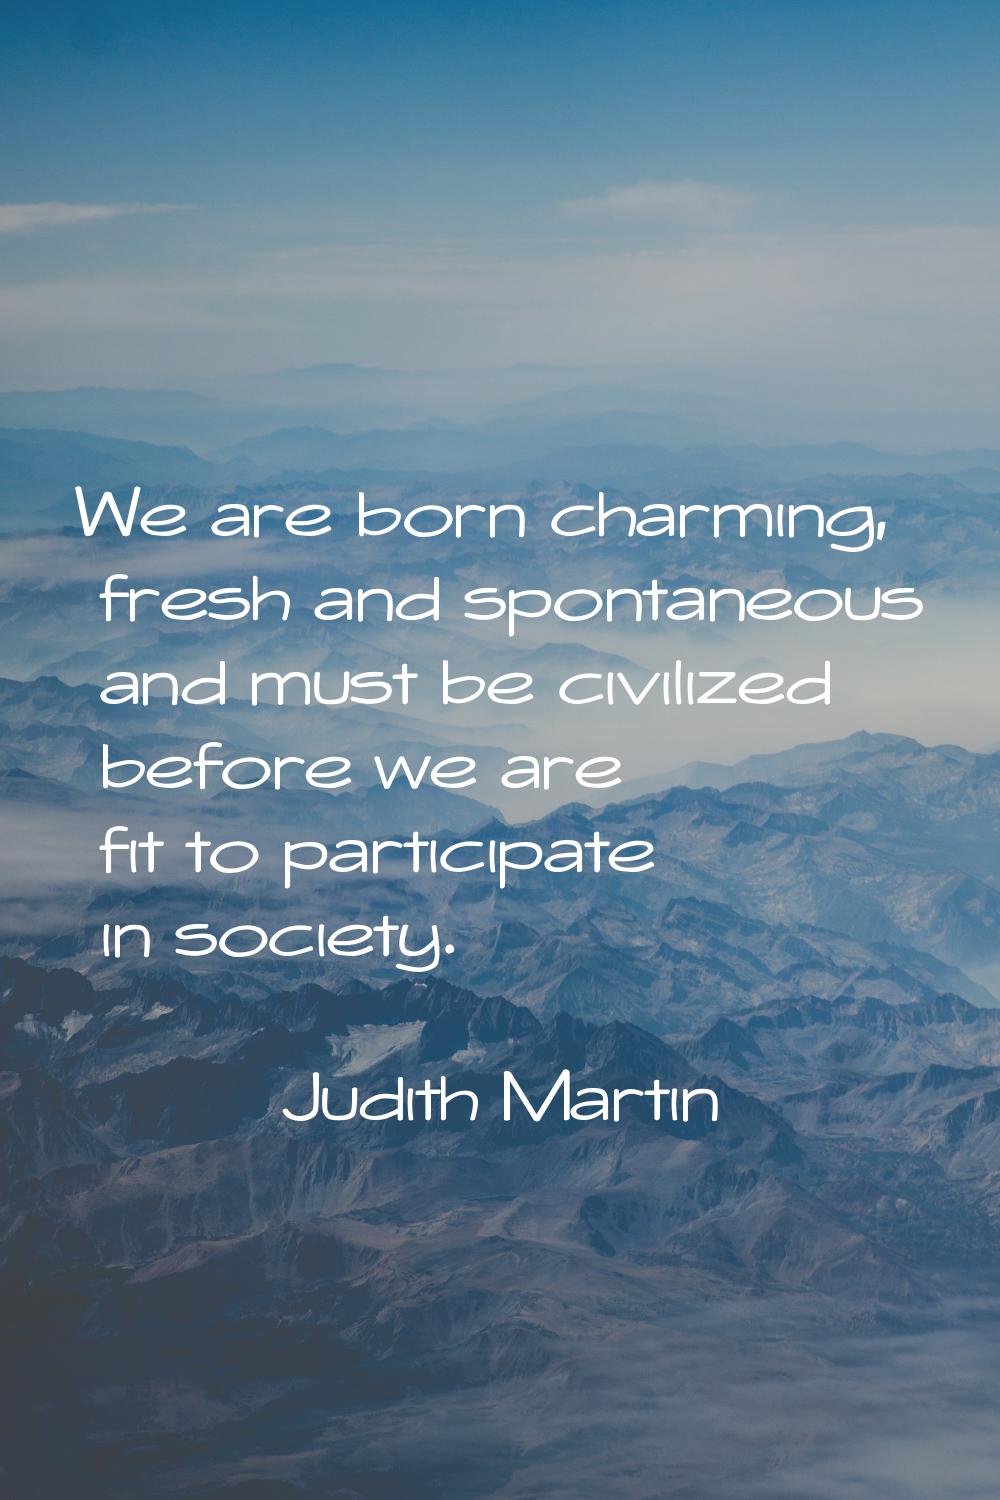 We are born charming, fresh and spontaneous and must be civilized before we are fit to participate 